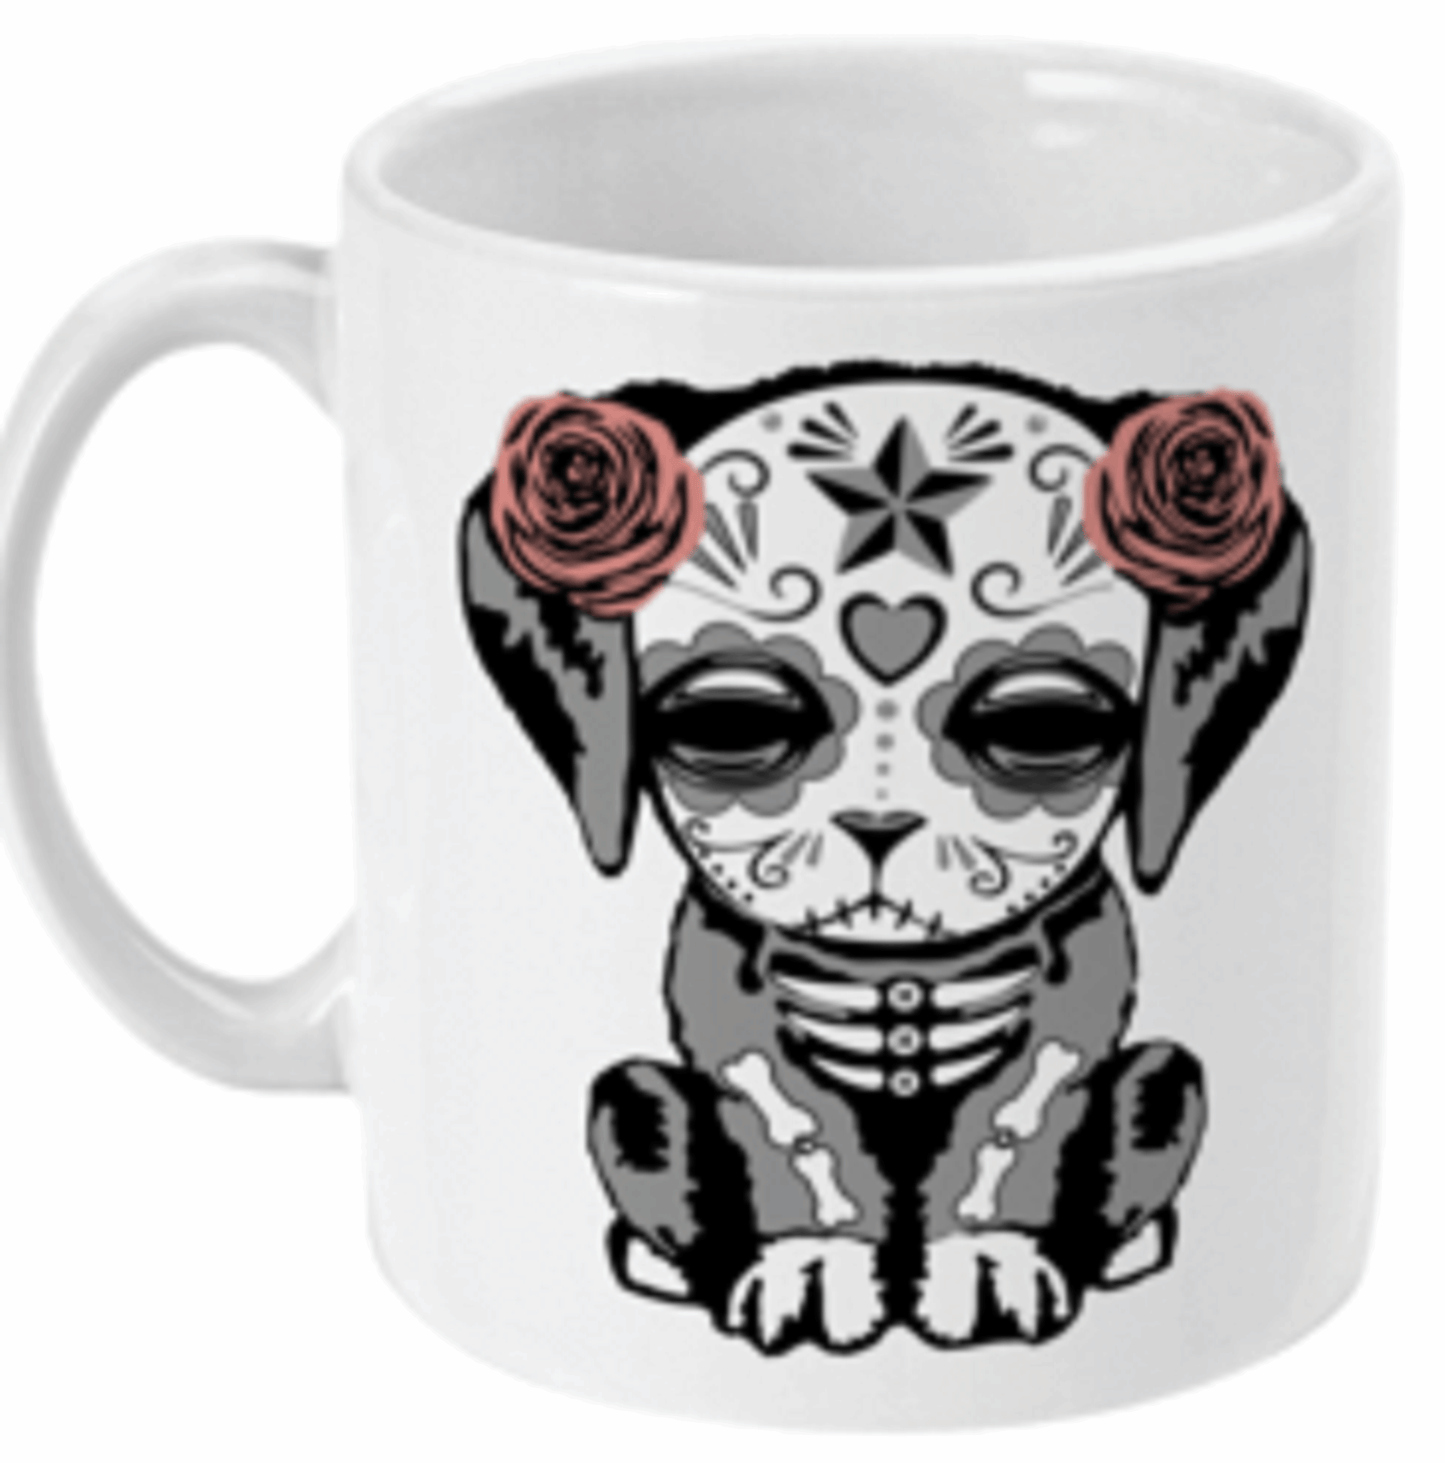  Sugar Skull Day of The Dead Dog Coffee Mug by Free Spirit Accessories sold by Free Spirit Accessories